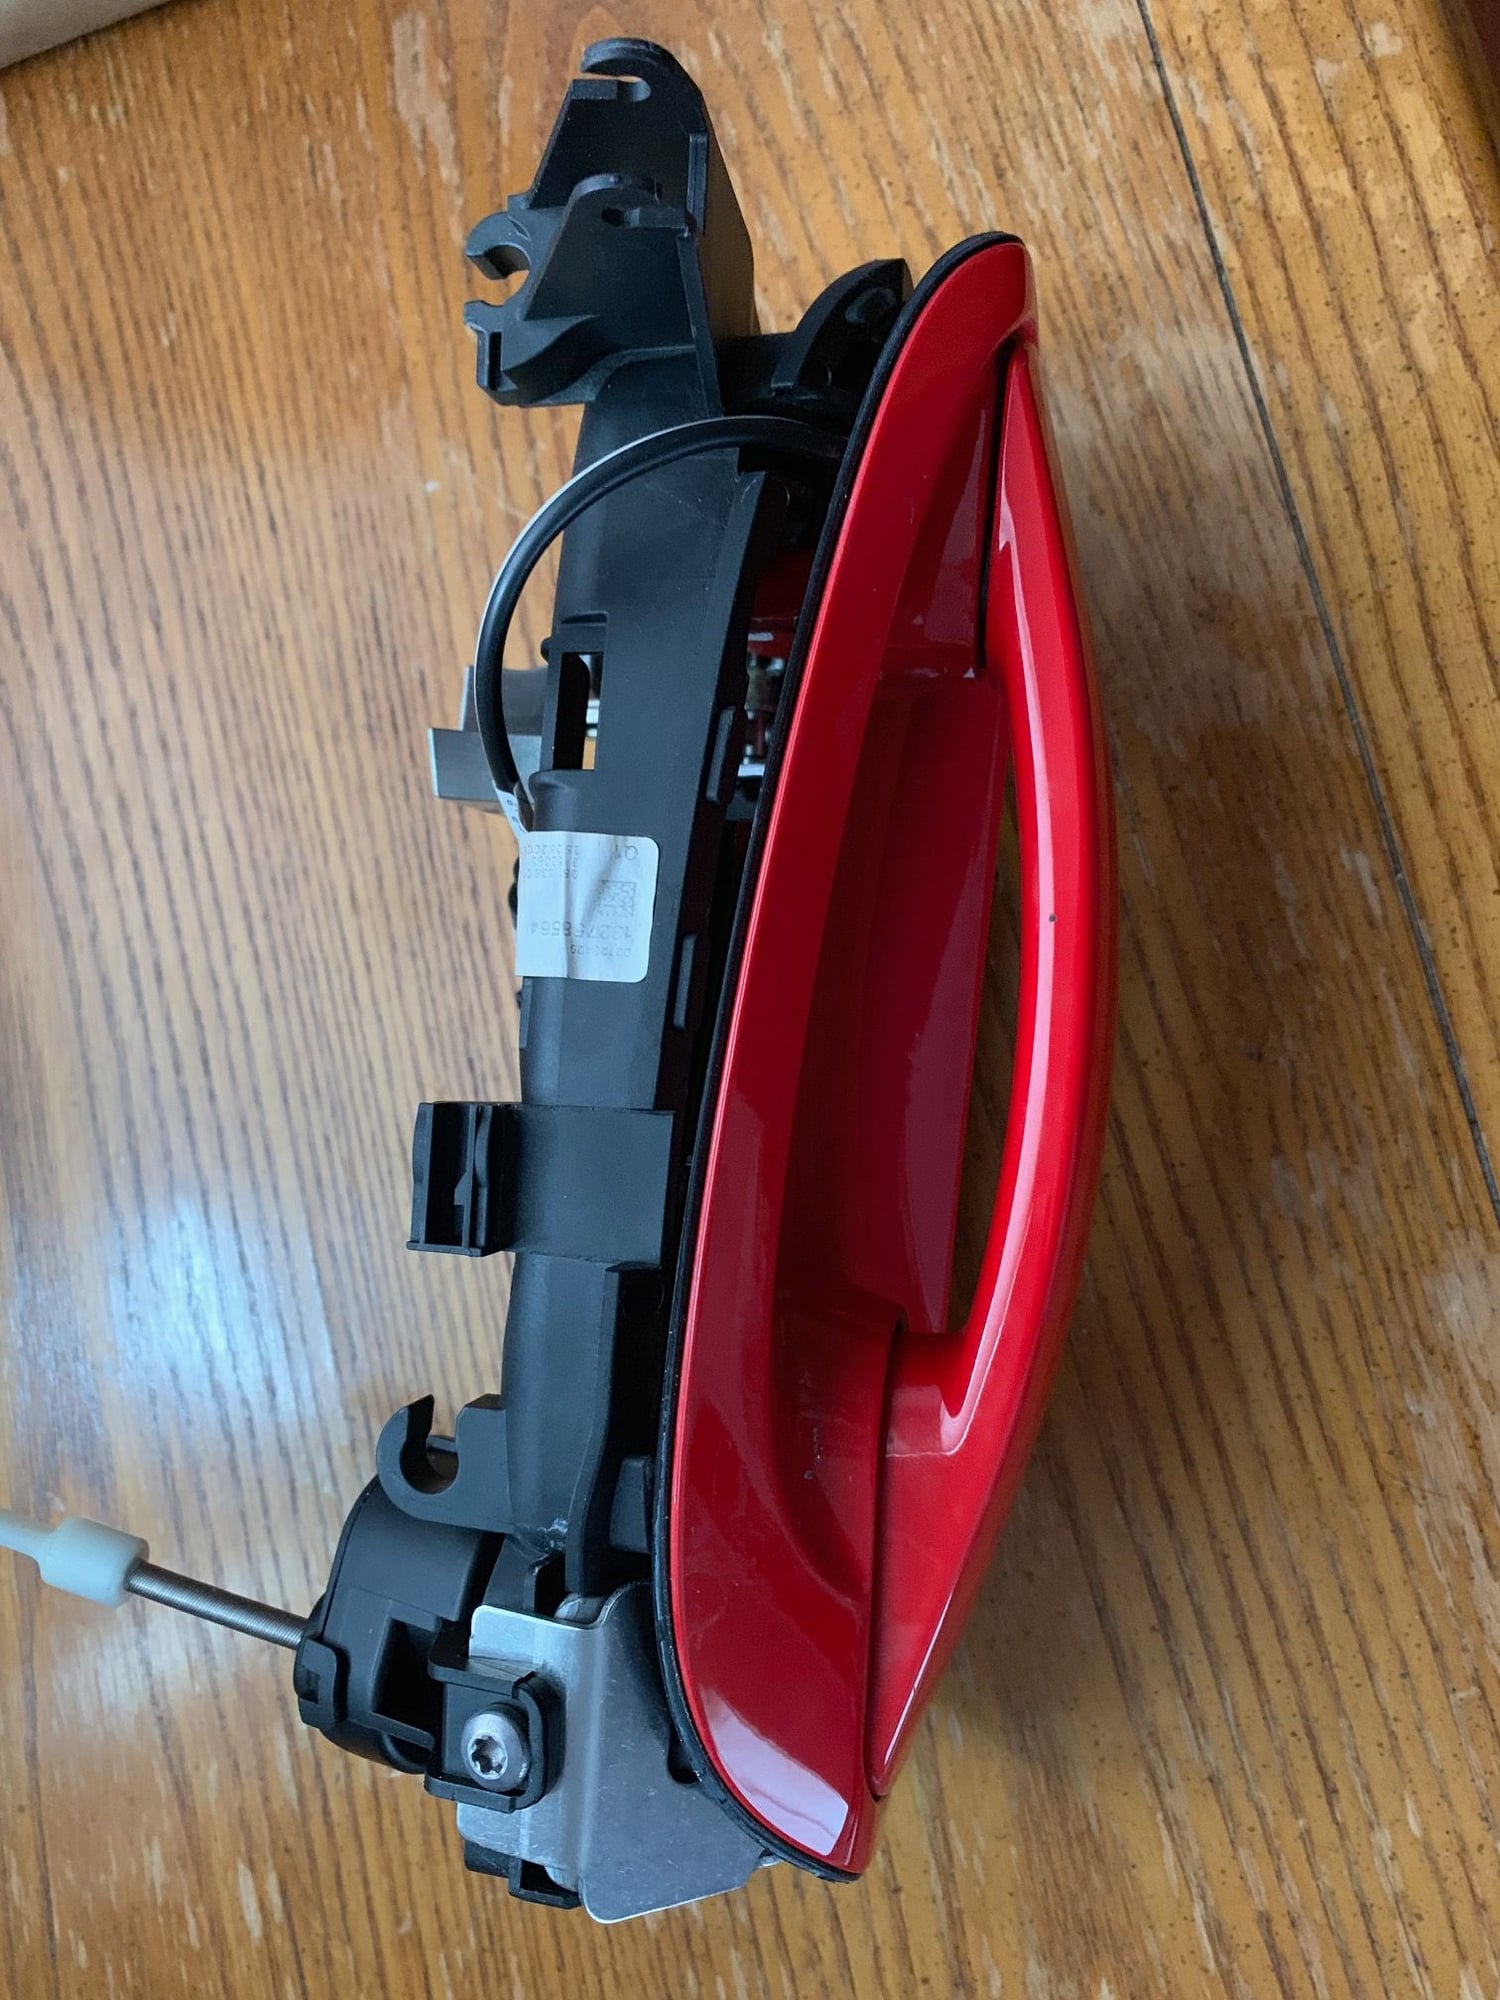 Exterior Body Parts - 981 Cayman/Boxster Driverside Door Handle (Guards Red) - Used - 2013 to 2016 Porsche Cayman - New York, NY 11106, United States